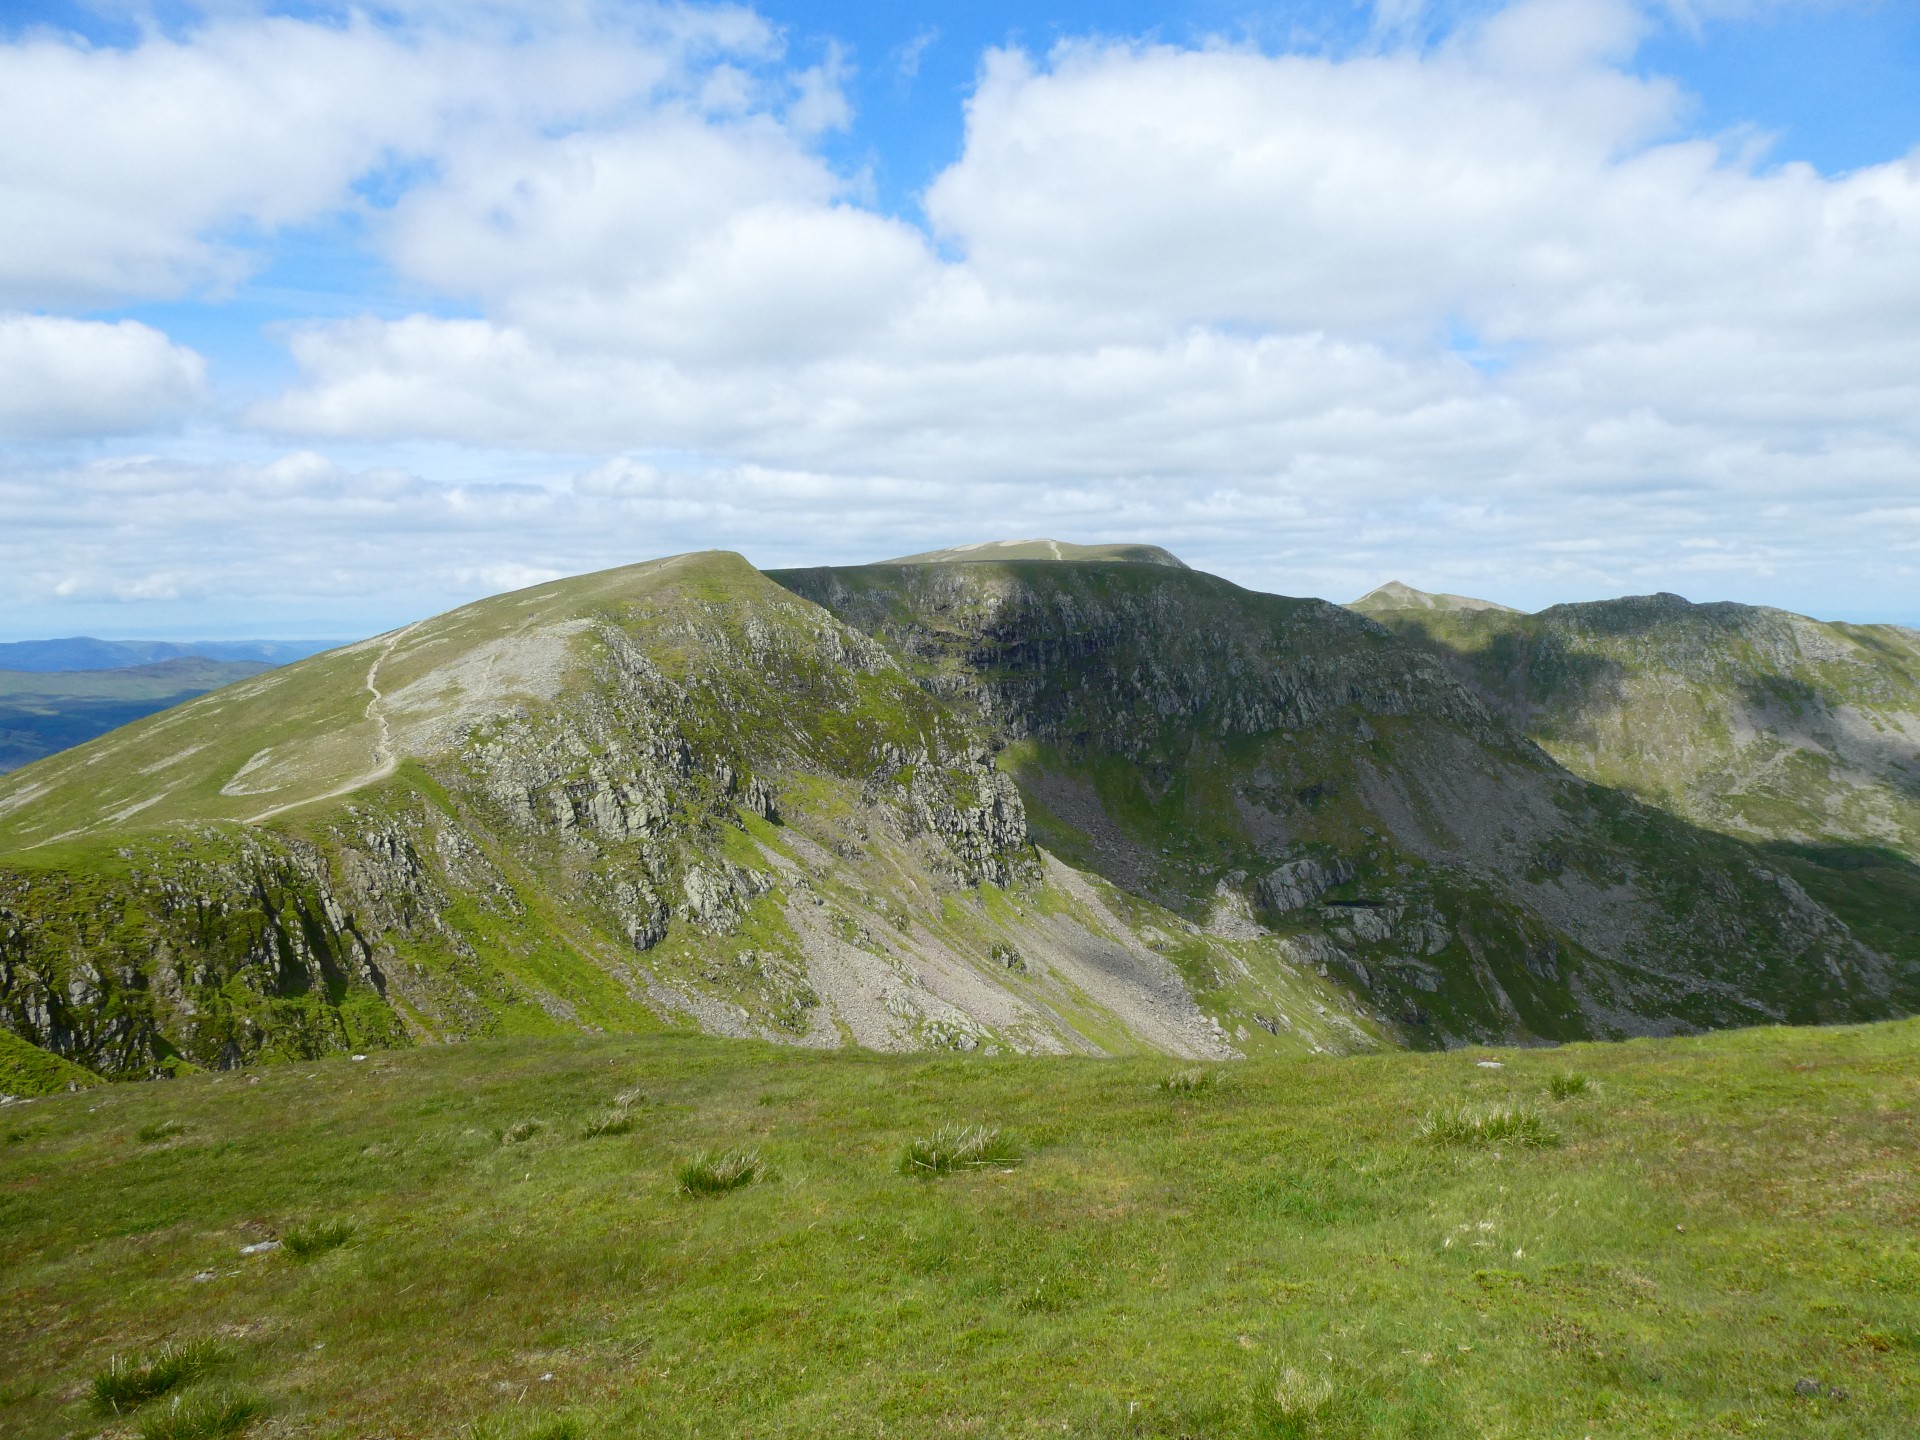 Next Top is Nethermost Pike